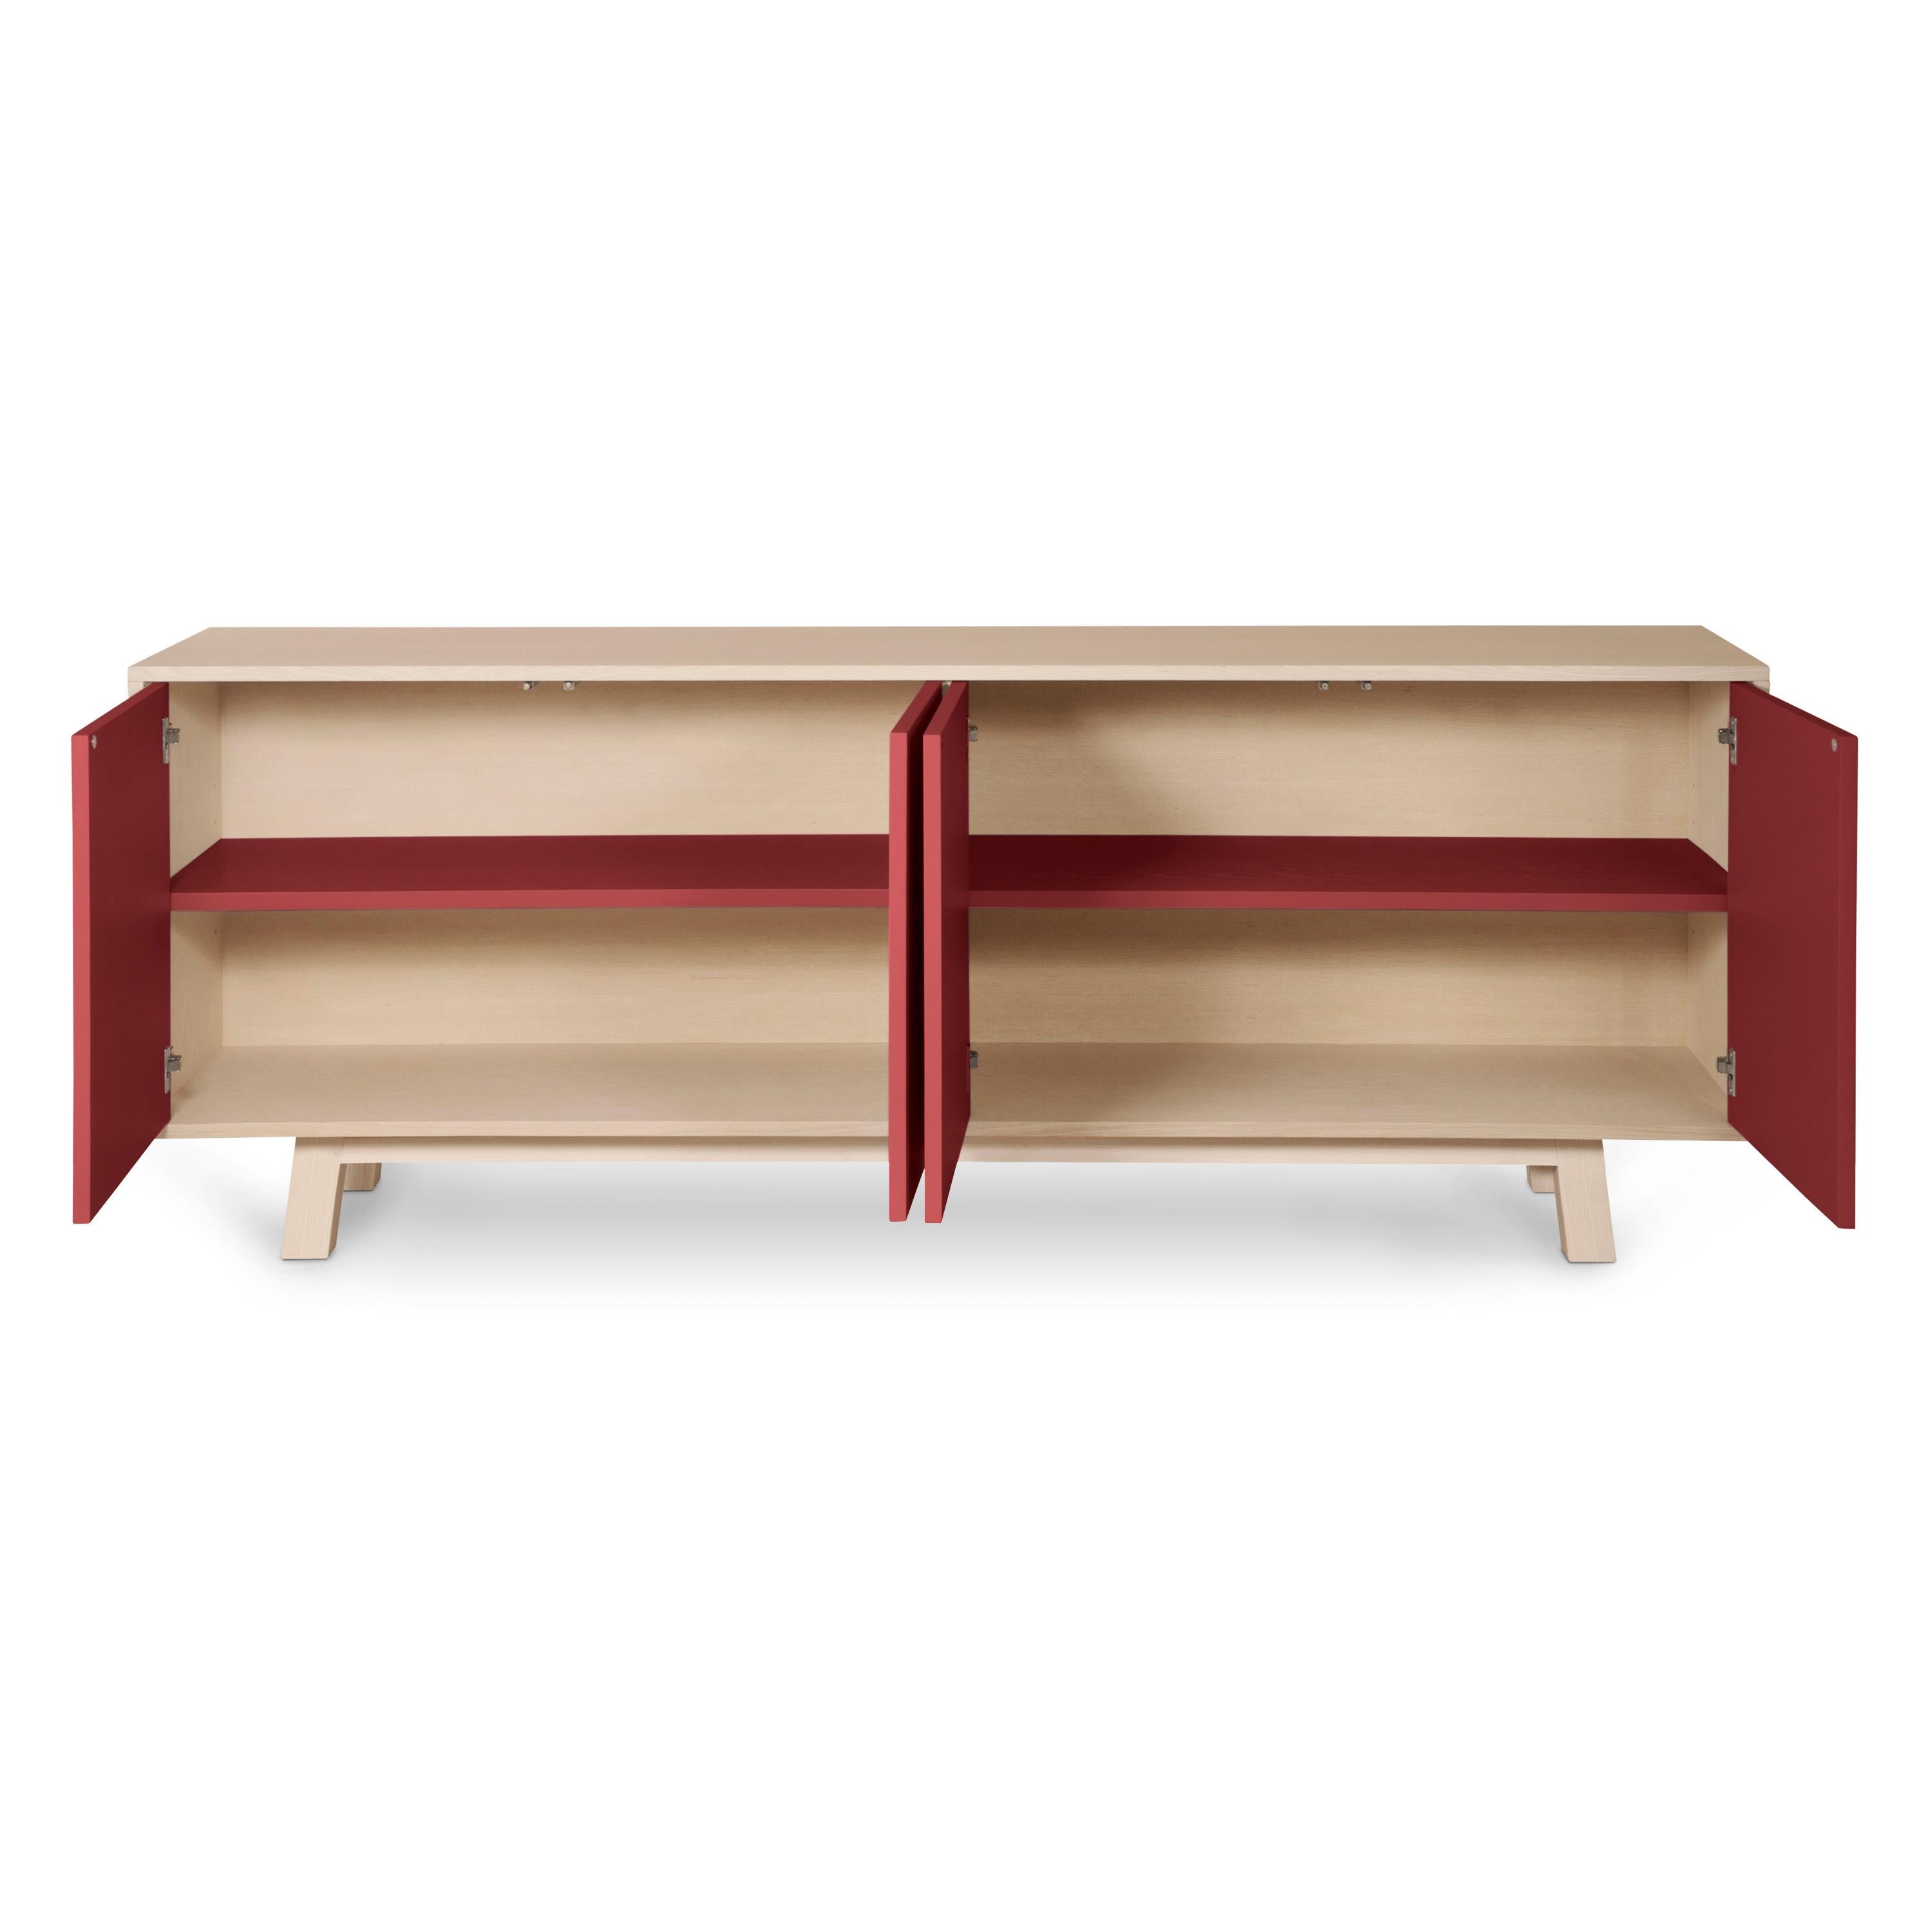 Lacquered Red 4-Door Low Sideboard in PEFC-Certified Ash Wood, Design Eric Gizard, Paris For Sale